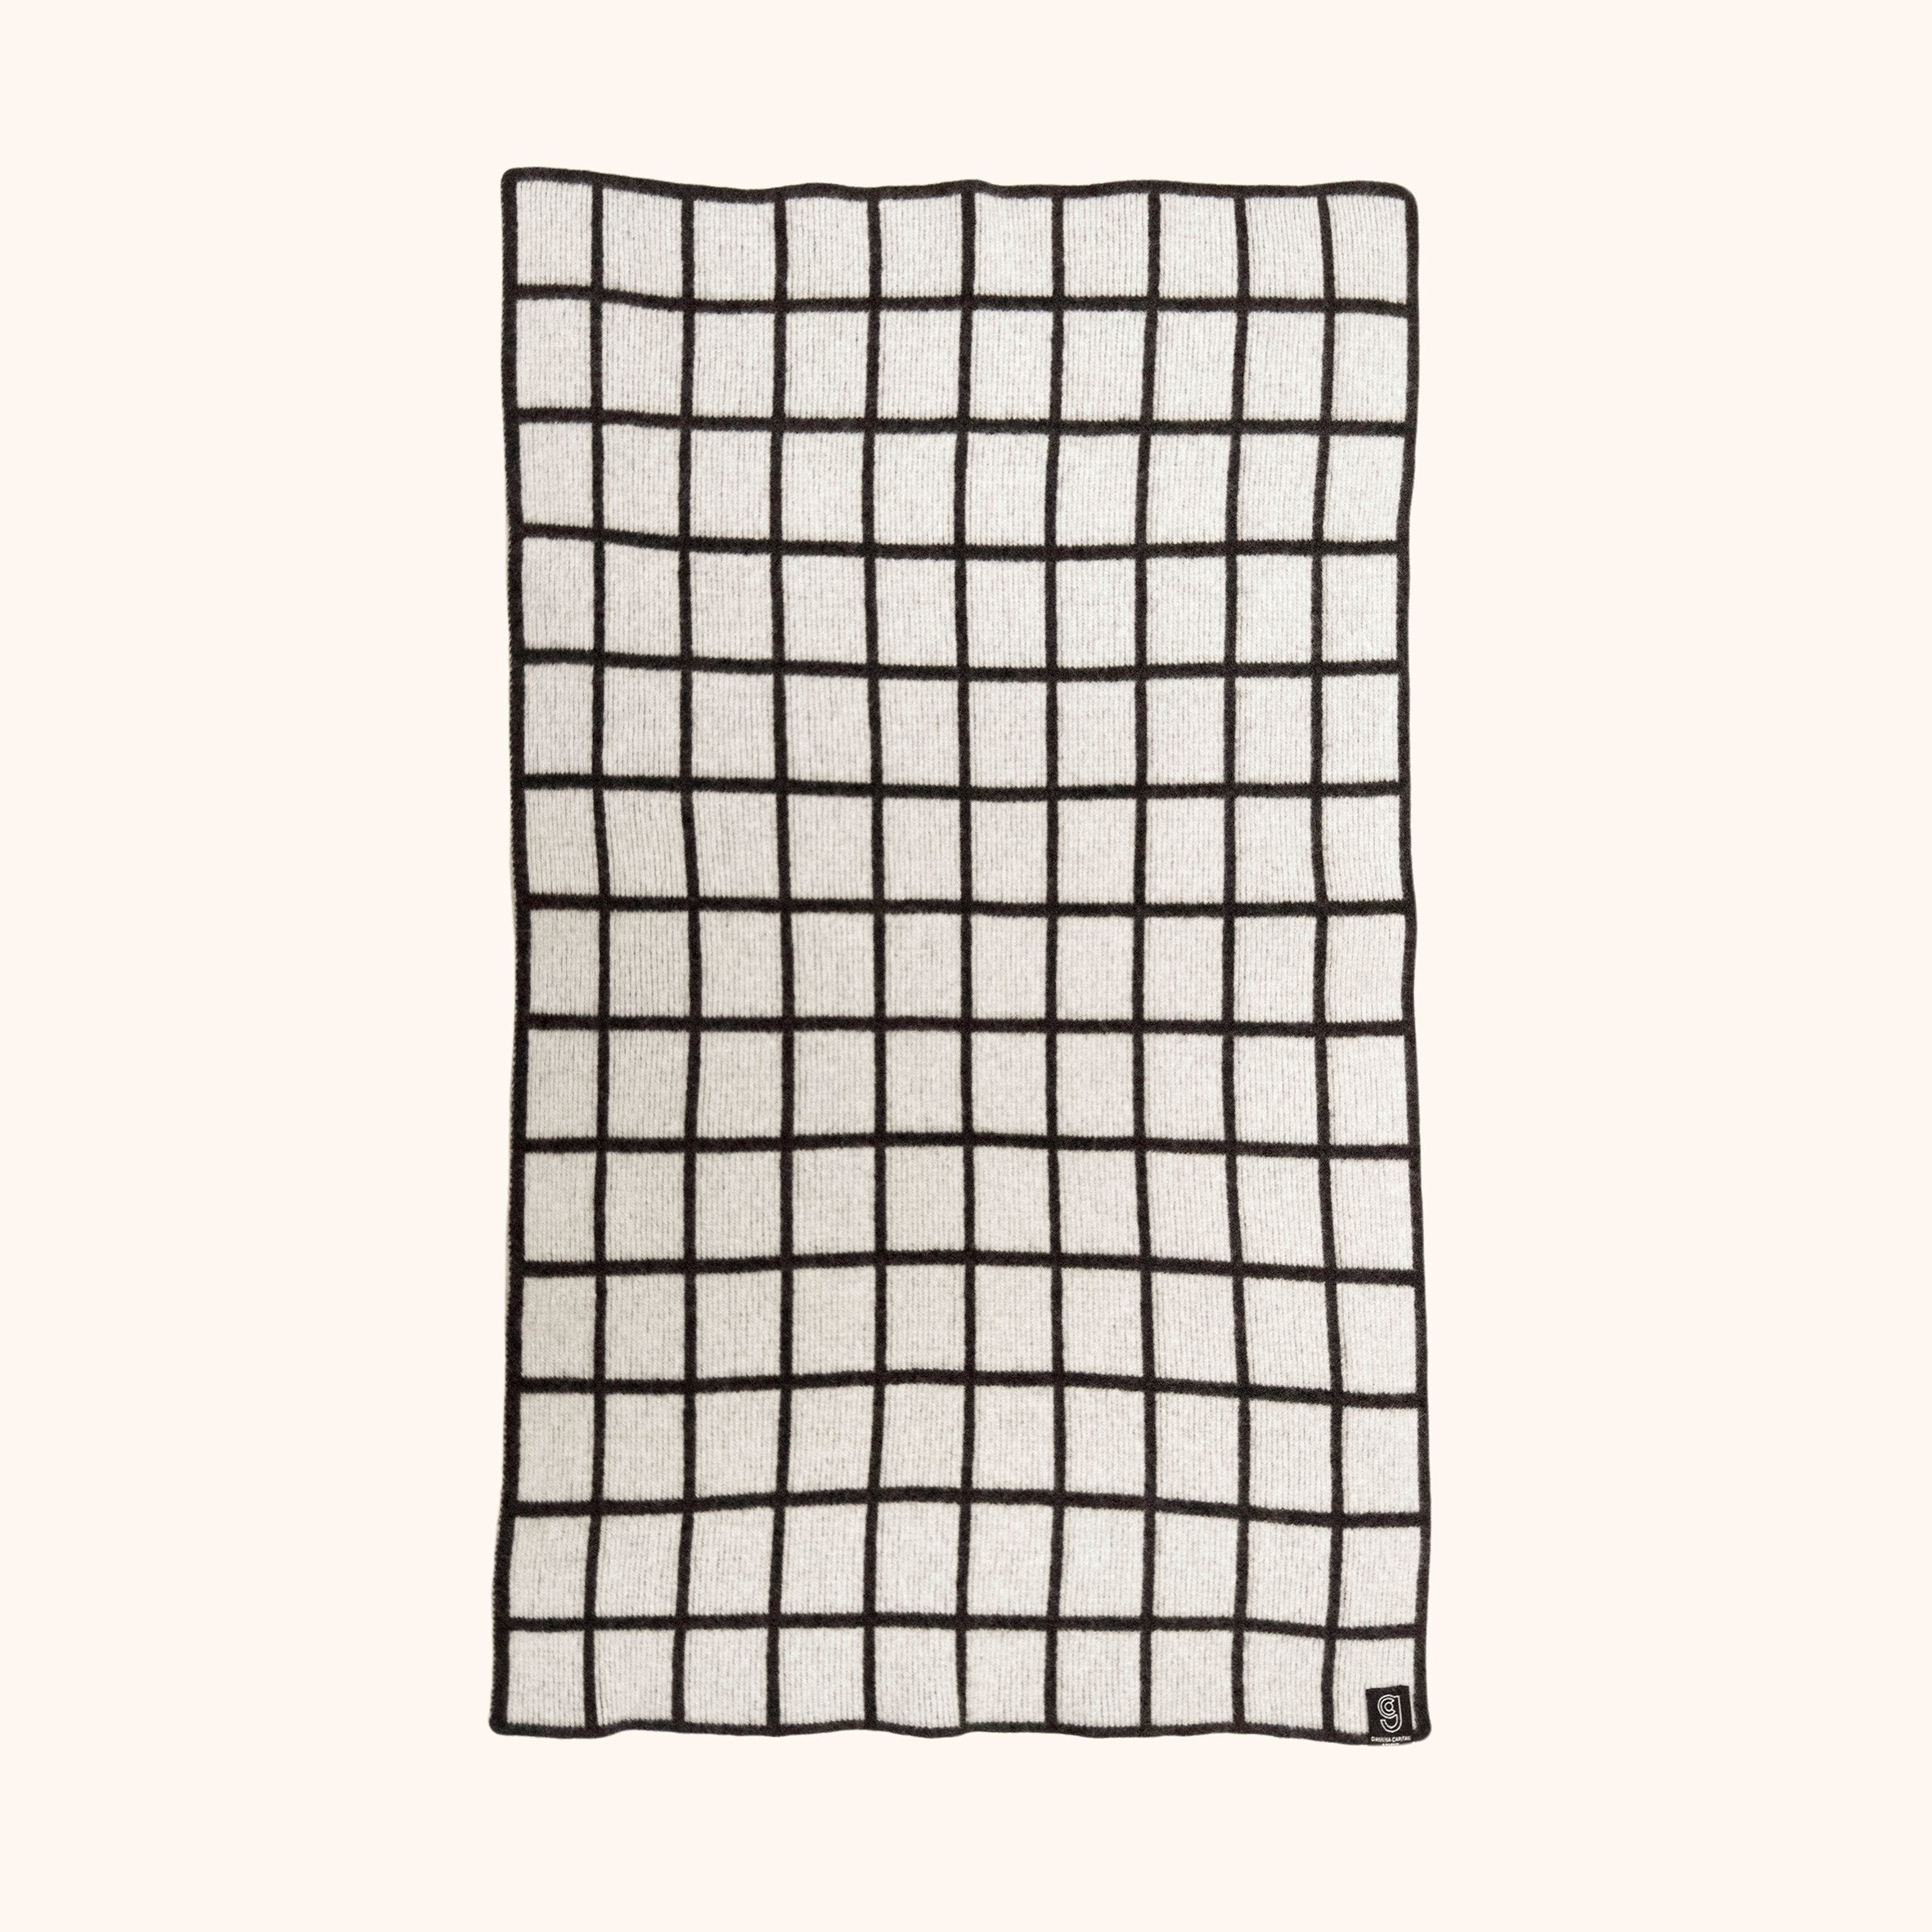 GRID BABY BLANKET IN GREY AND GREY